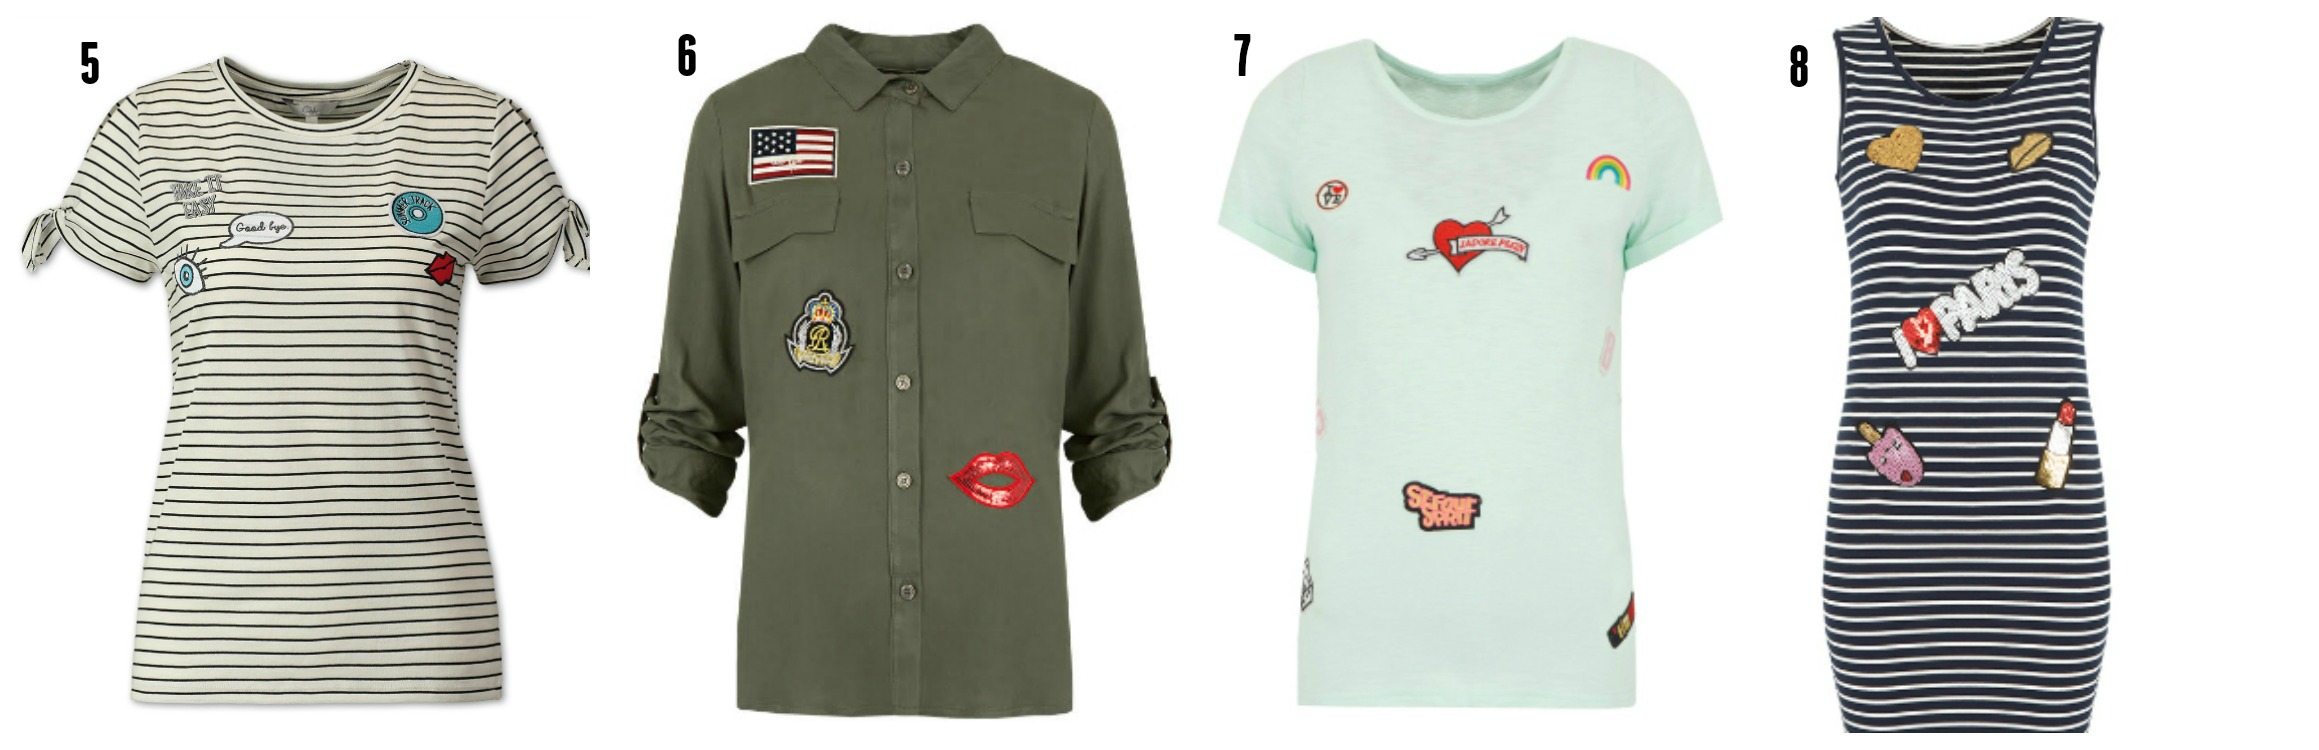 patches op kleding trend tshirt sweather jurk blouse